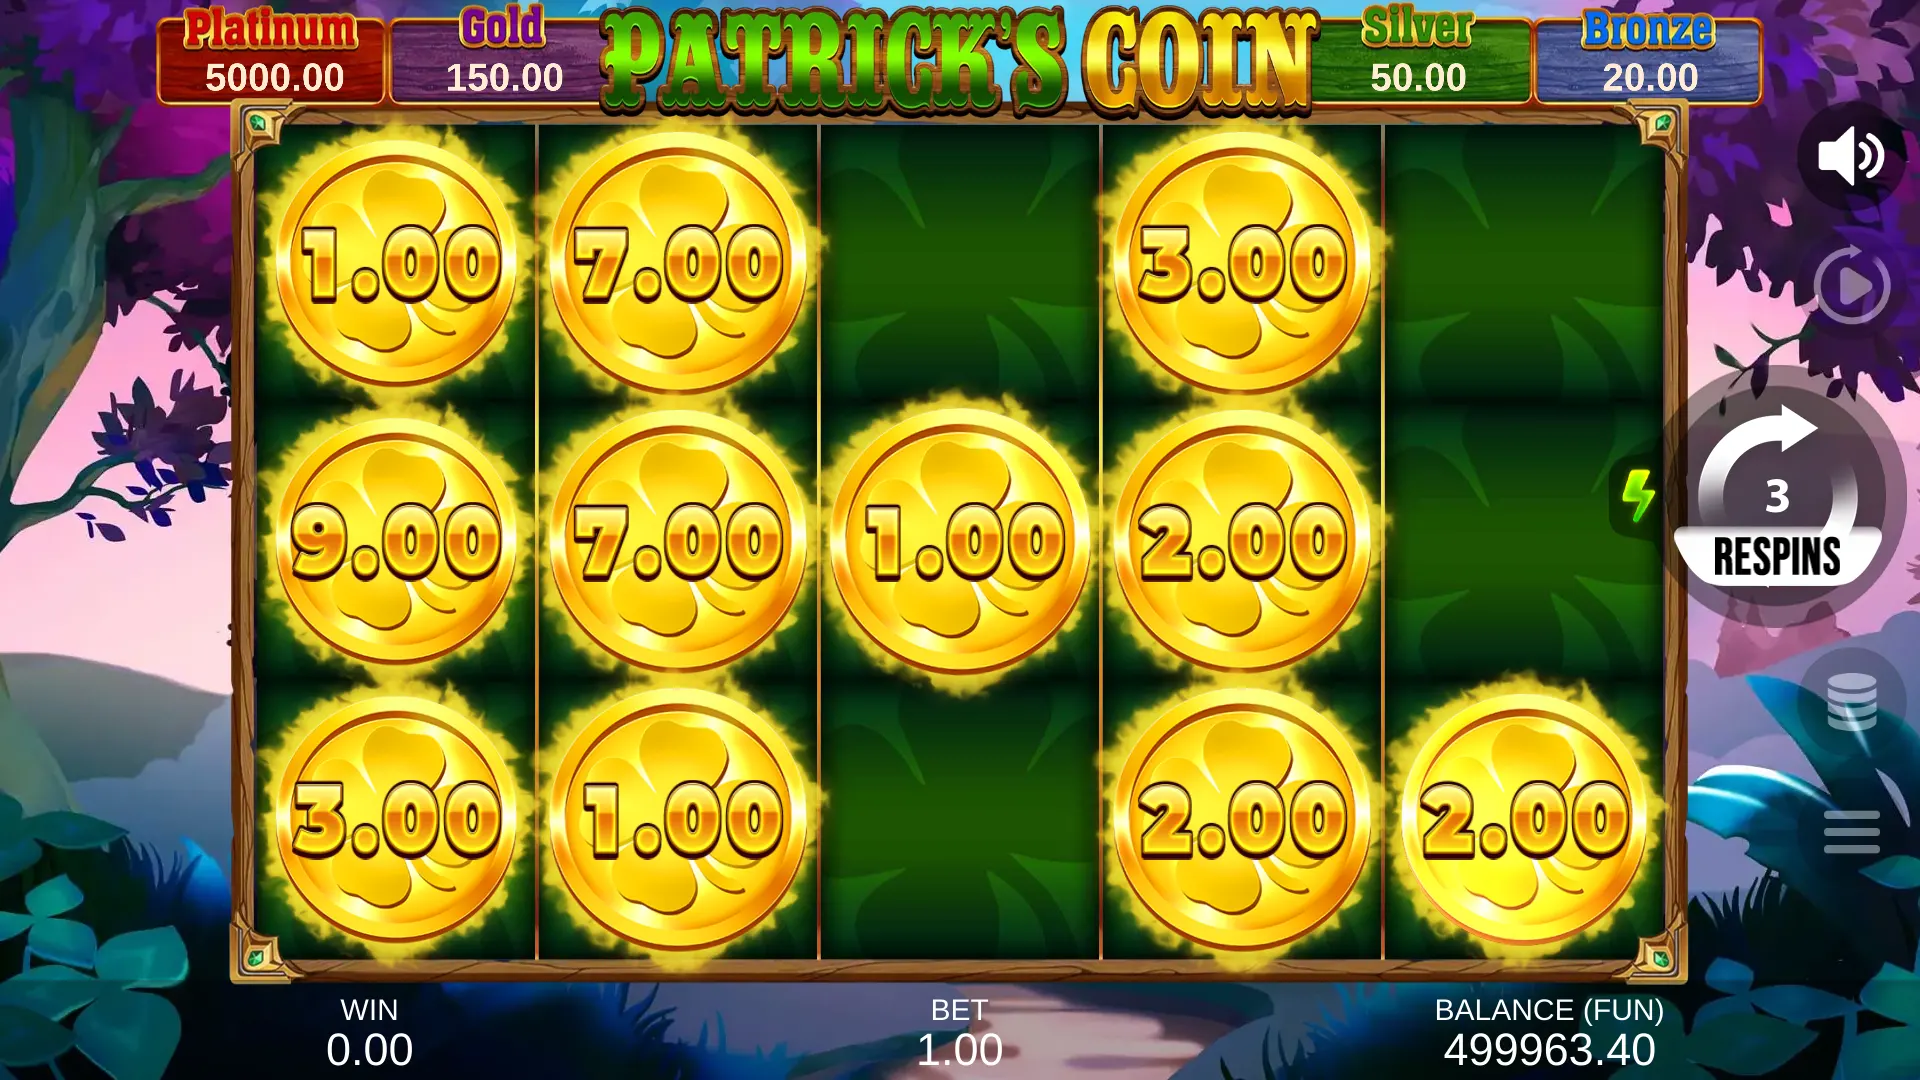 Patrick’s Coin: Hold the Spin Bonus Game